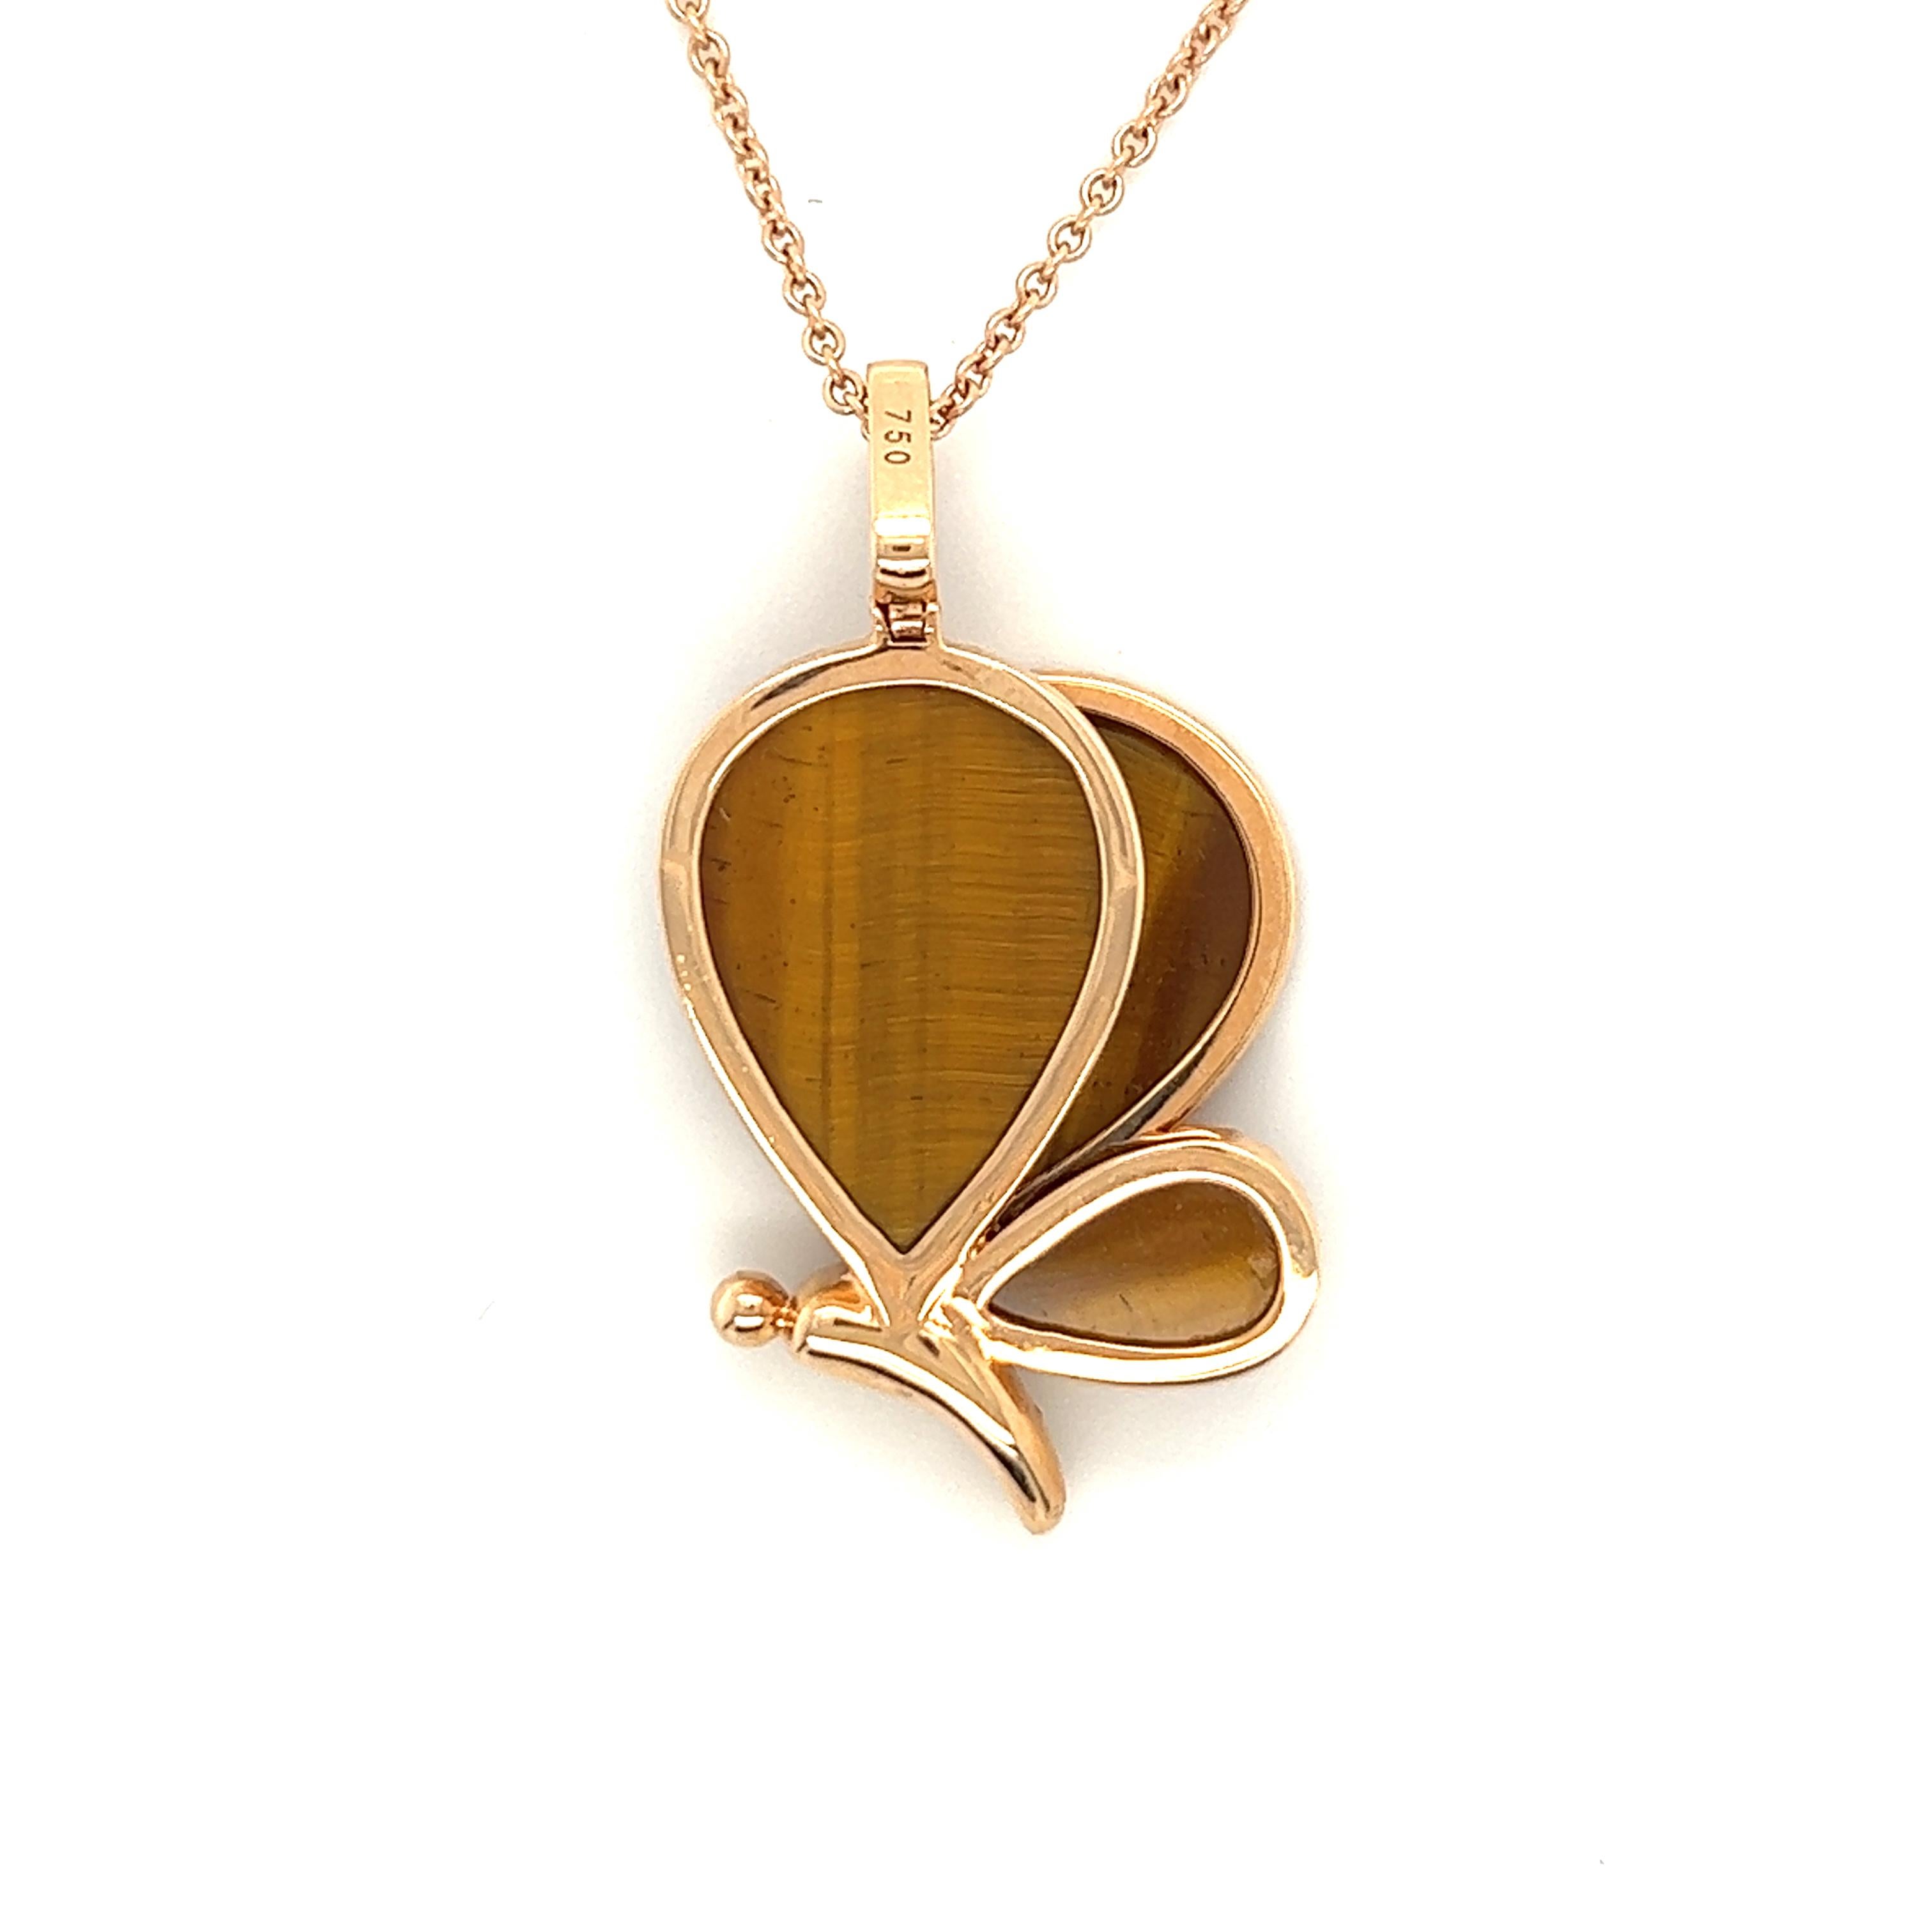 Butterfly Tiger Eye Stone 18K Rose Gold Diamond Necklace

8 Diamonds 0.04CT
9 Fancy Diamonds 0.14CT
3 Tiger Eye Stones 5.98CT
18 K Rose Gold 7.57 GM

Tiger iron is an altered rock composed chiefly of tiger's eye, red jasper and black hematite. Roman